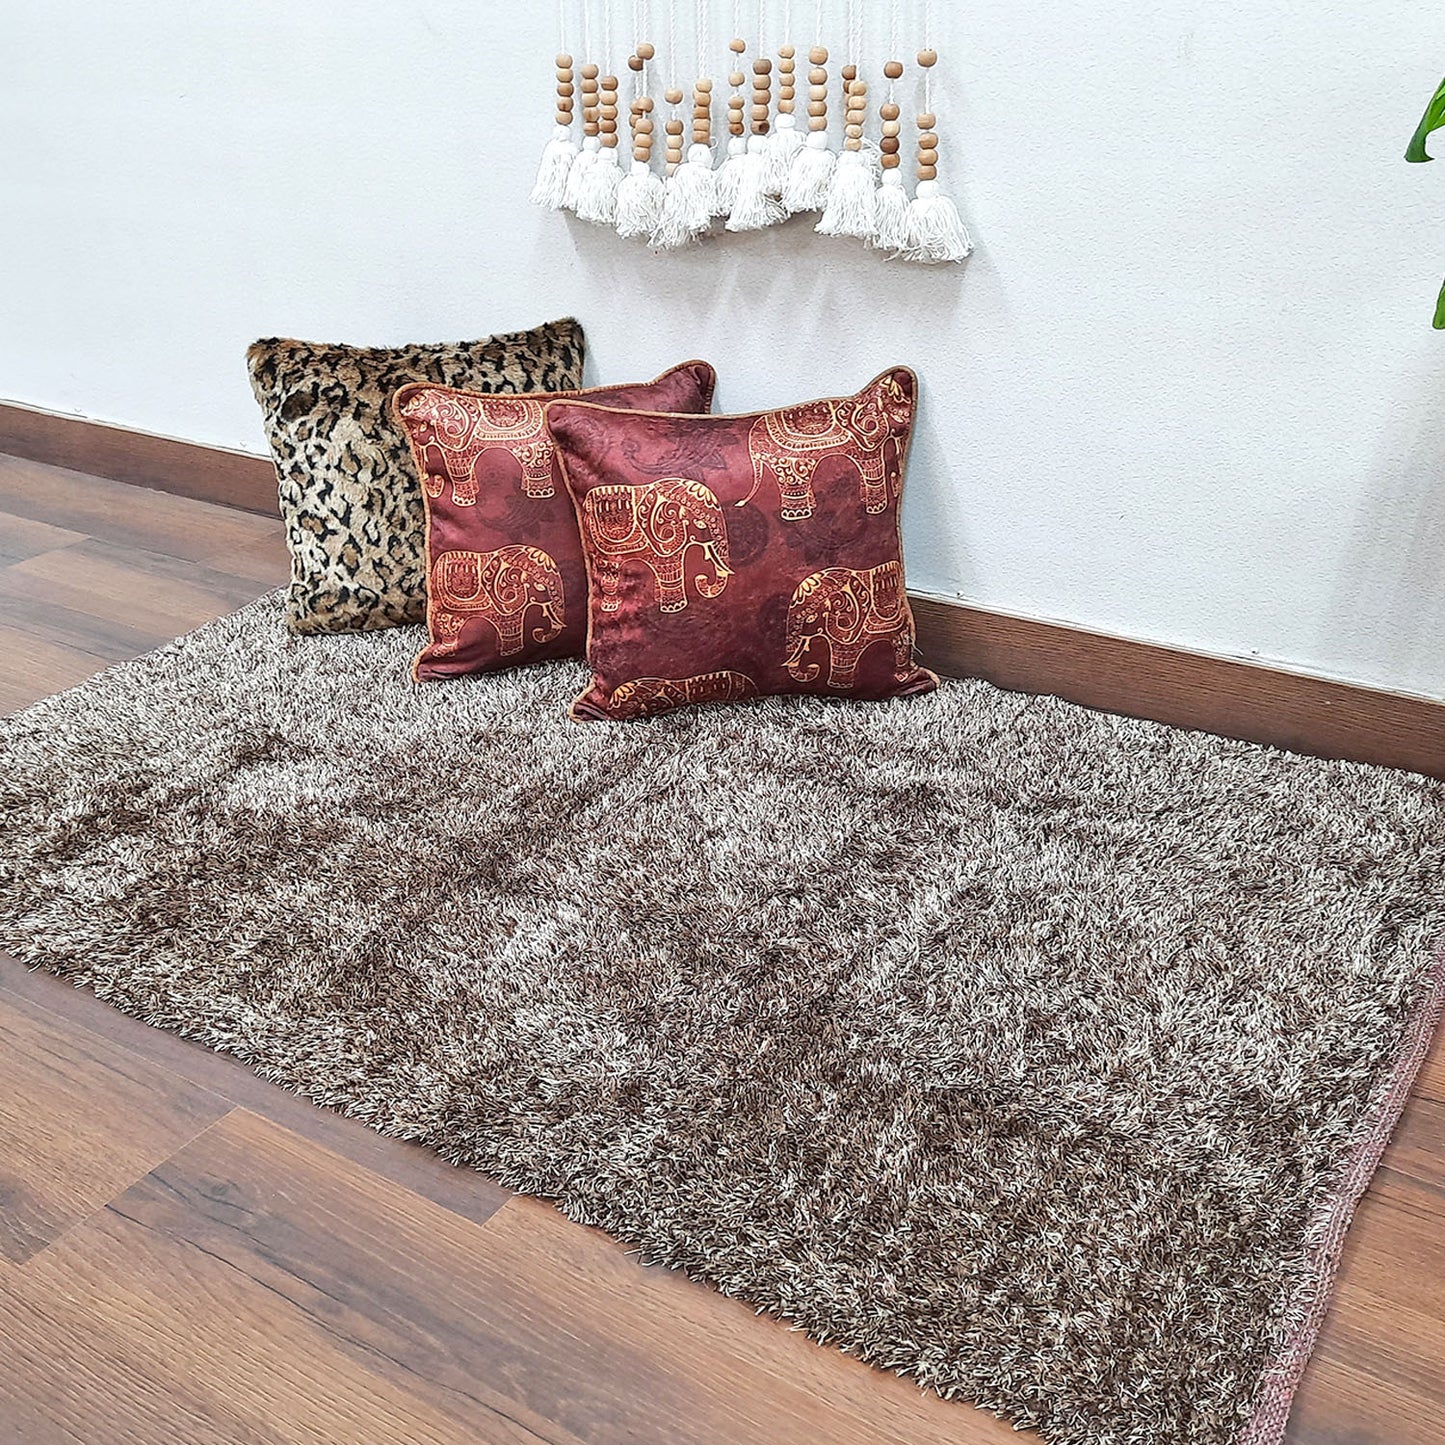 Flurry Yarn Fur Dhurrie For Living Room|Brown With White Shade|By Avioni| 90cm x 150cm (~3×5 Feet)